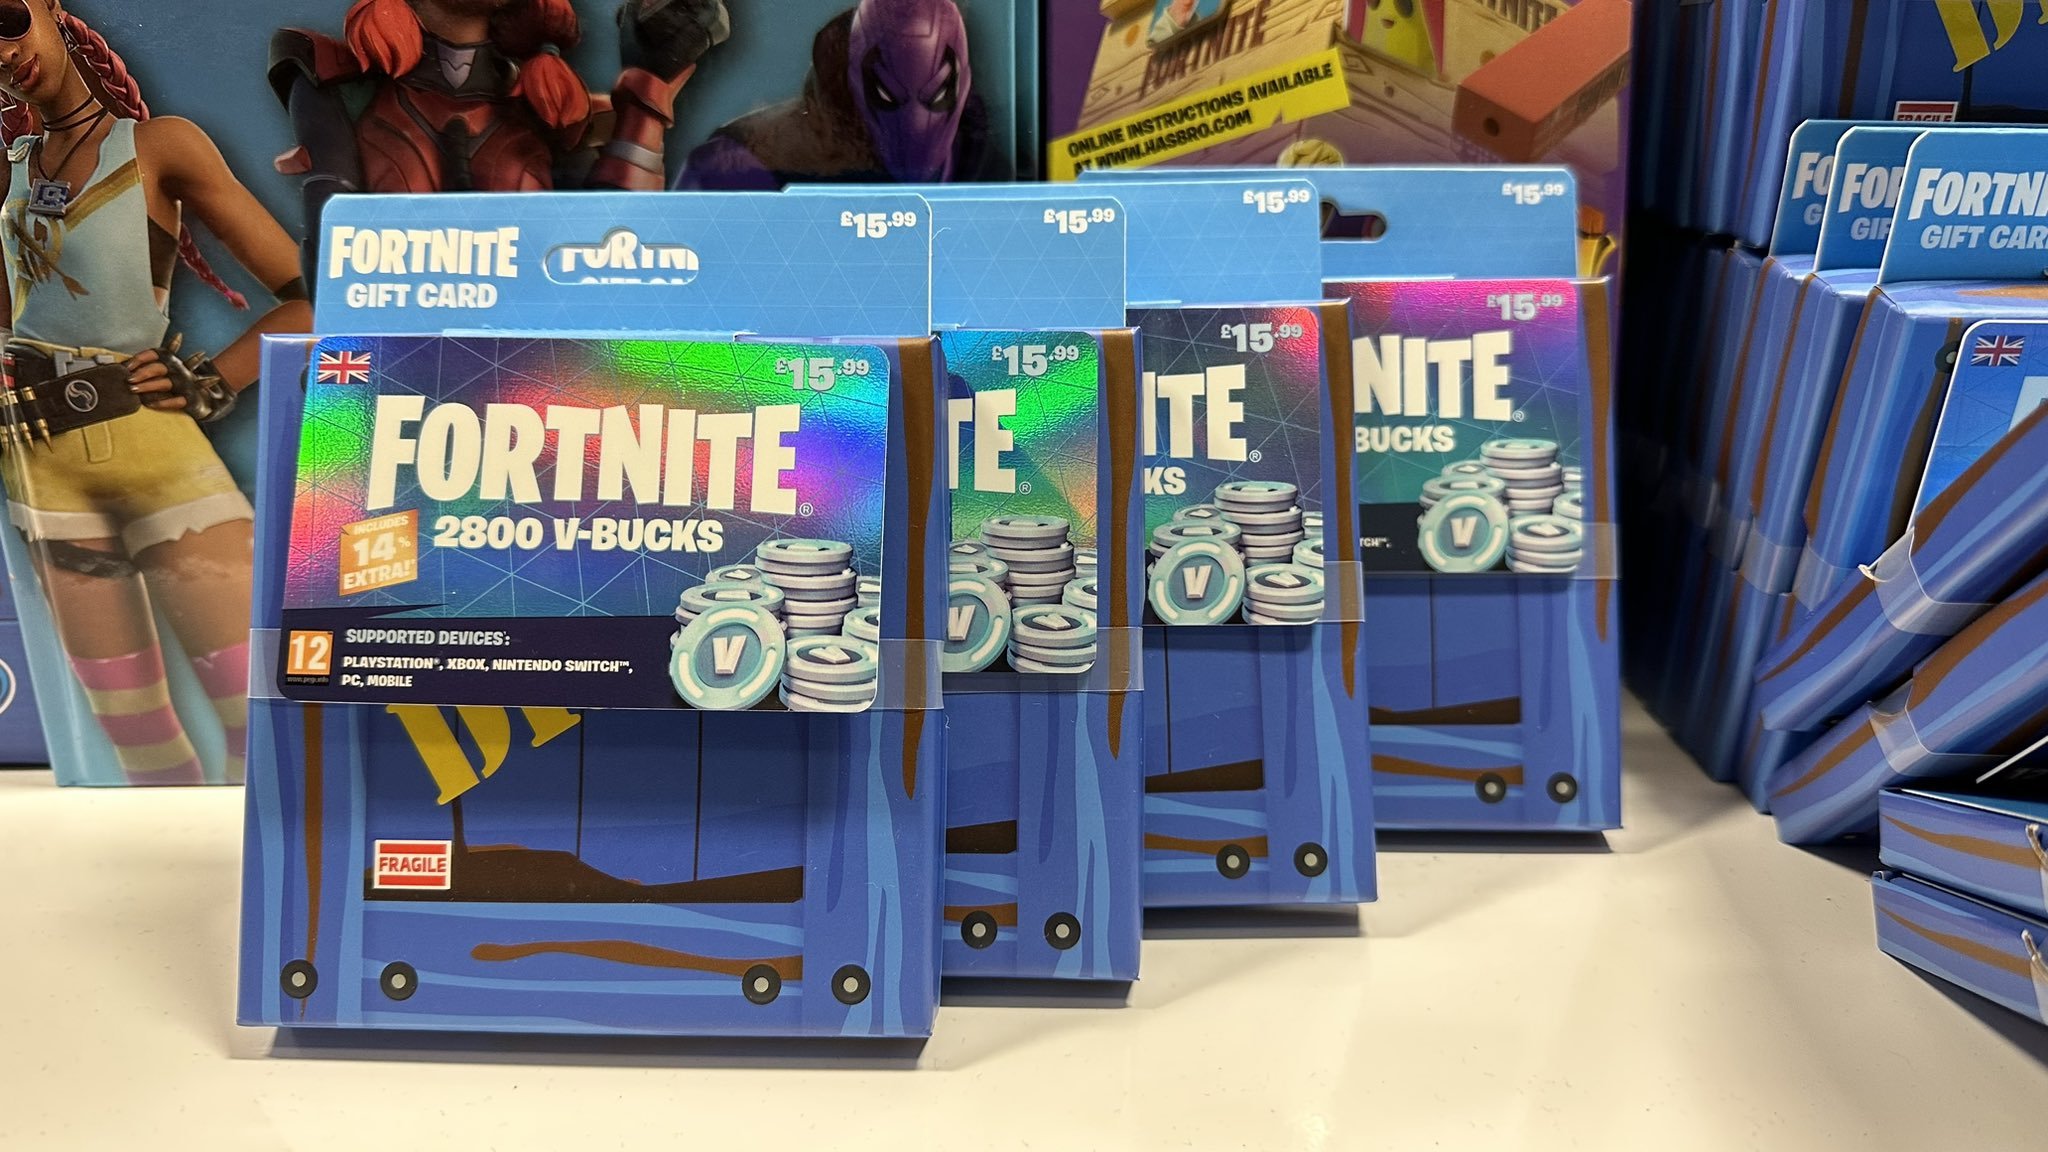 Fortnite V-Bucks Cards Coming to Retailers Soon